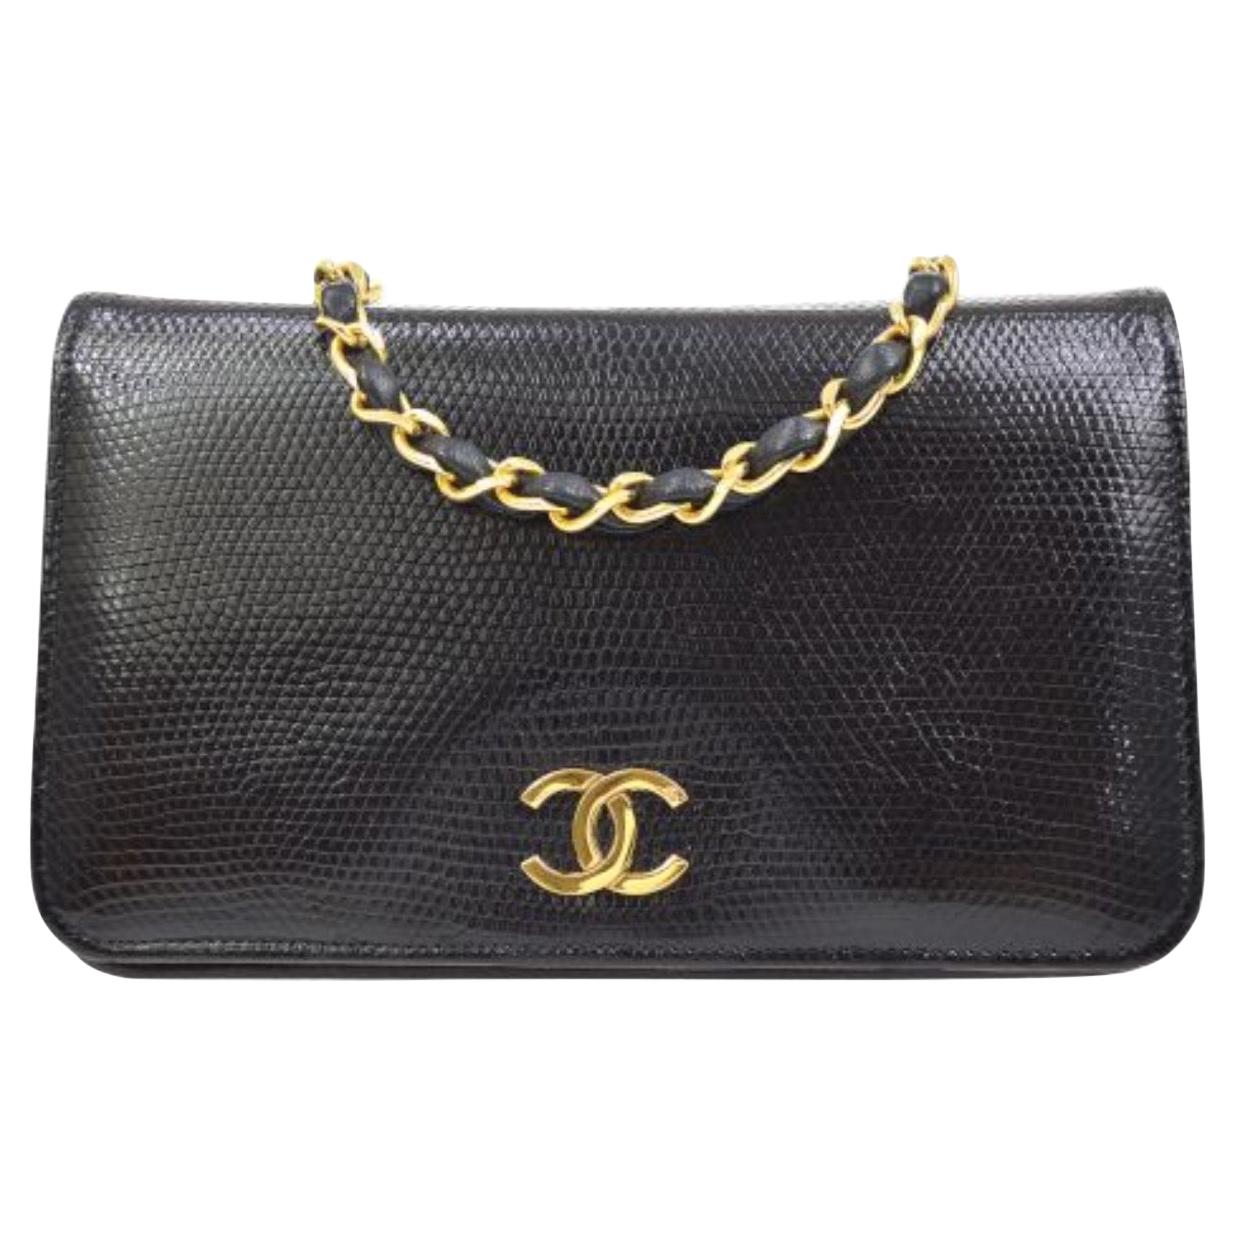 Chanel Black Lizard Leather Exotic Leather Gold Small Shoulder Flap Bag in Box